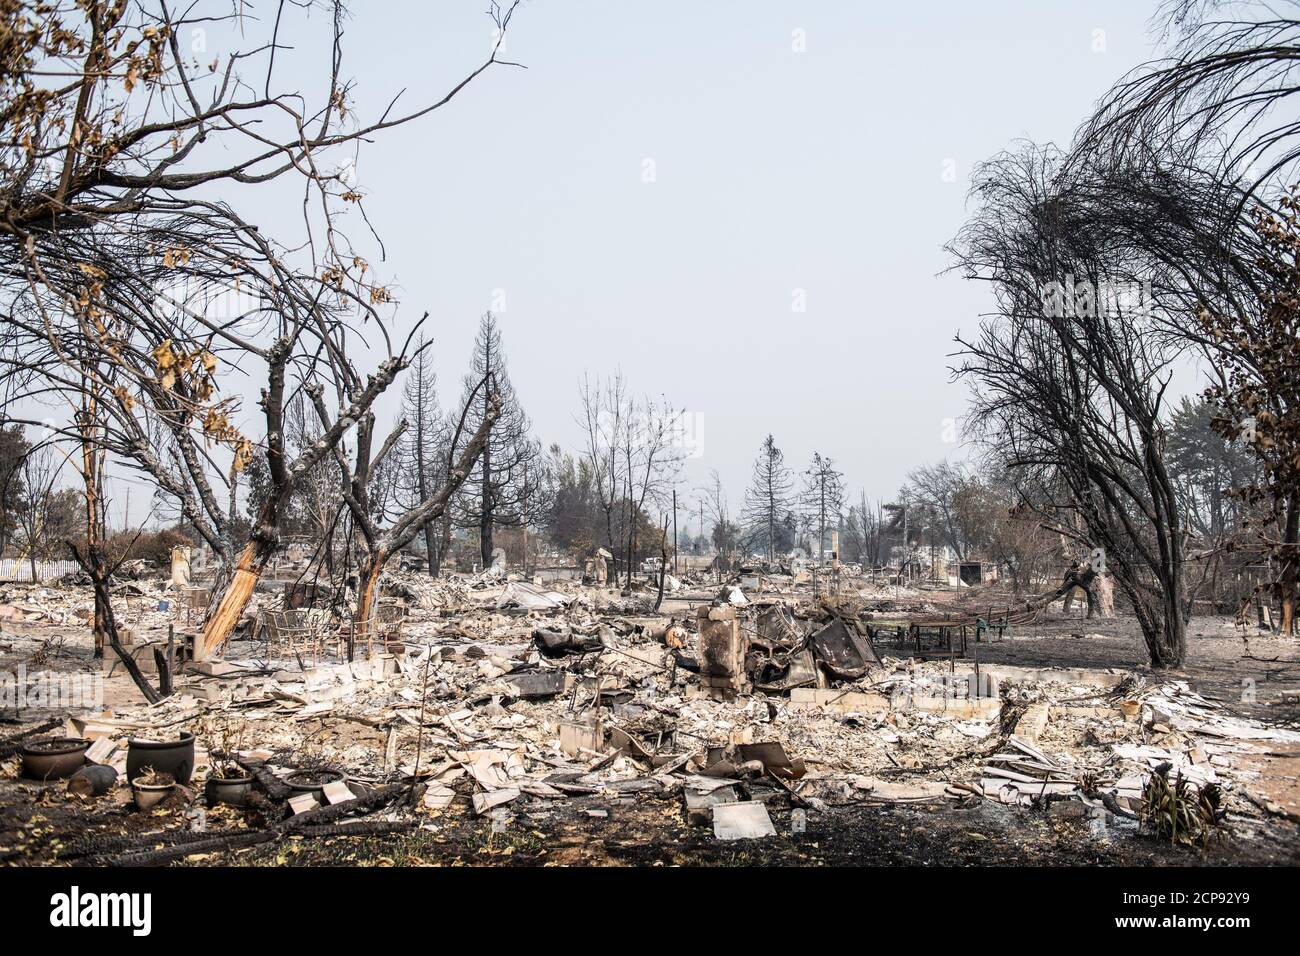 Talent, United States. 18th Sep, 2020. TALENT, ORE - SEPTEMBER 18, 2020: A general view of the aftermath of the Almeda Fire. The town of Talent, Oregon, showing the burned out homes, cars and rubble left behind. In Talent, about 20 miles north of the California border, homes were charred beyond recognition. Across the western US, at least 87 wildfires are burning, according to the National Interagency Fire Center. They've torched more than 4.7 million acres -- more than six times the area of Rhode Island. Credit: Chris Tuite/imageSPACE Credit: Imagespace/Alamy Live News Stock Photo